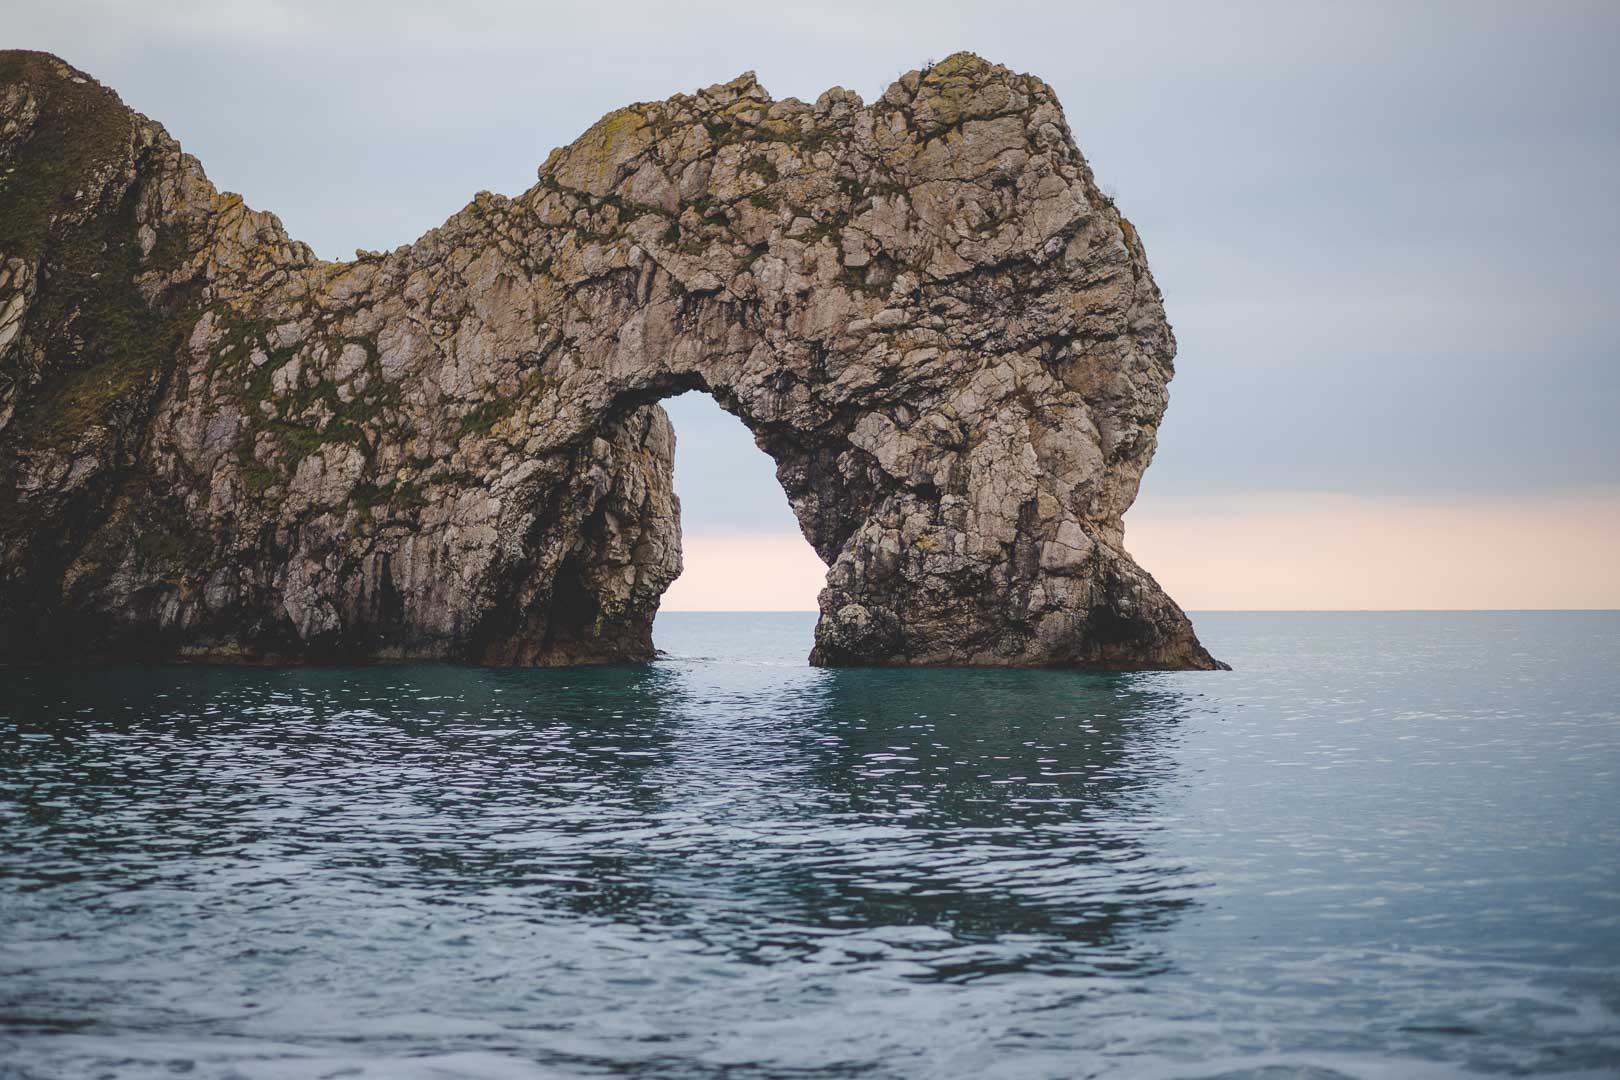 Durdle Door to Lulworth Cove Walk [full guide + free map included]